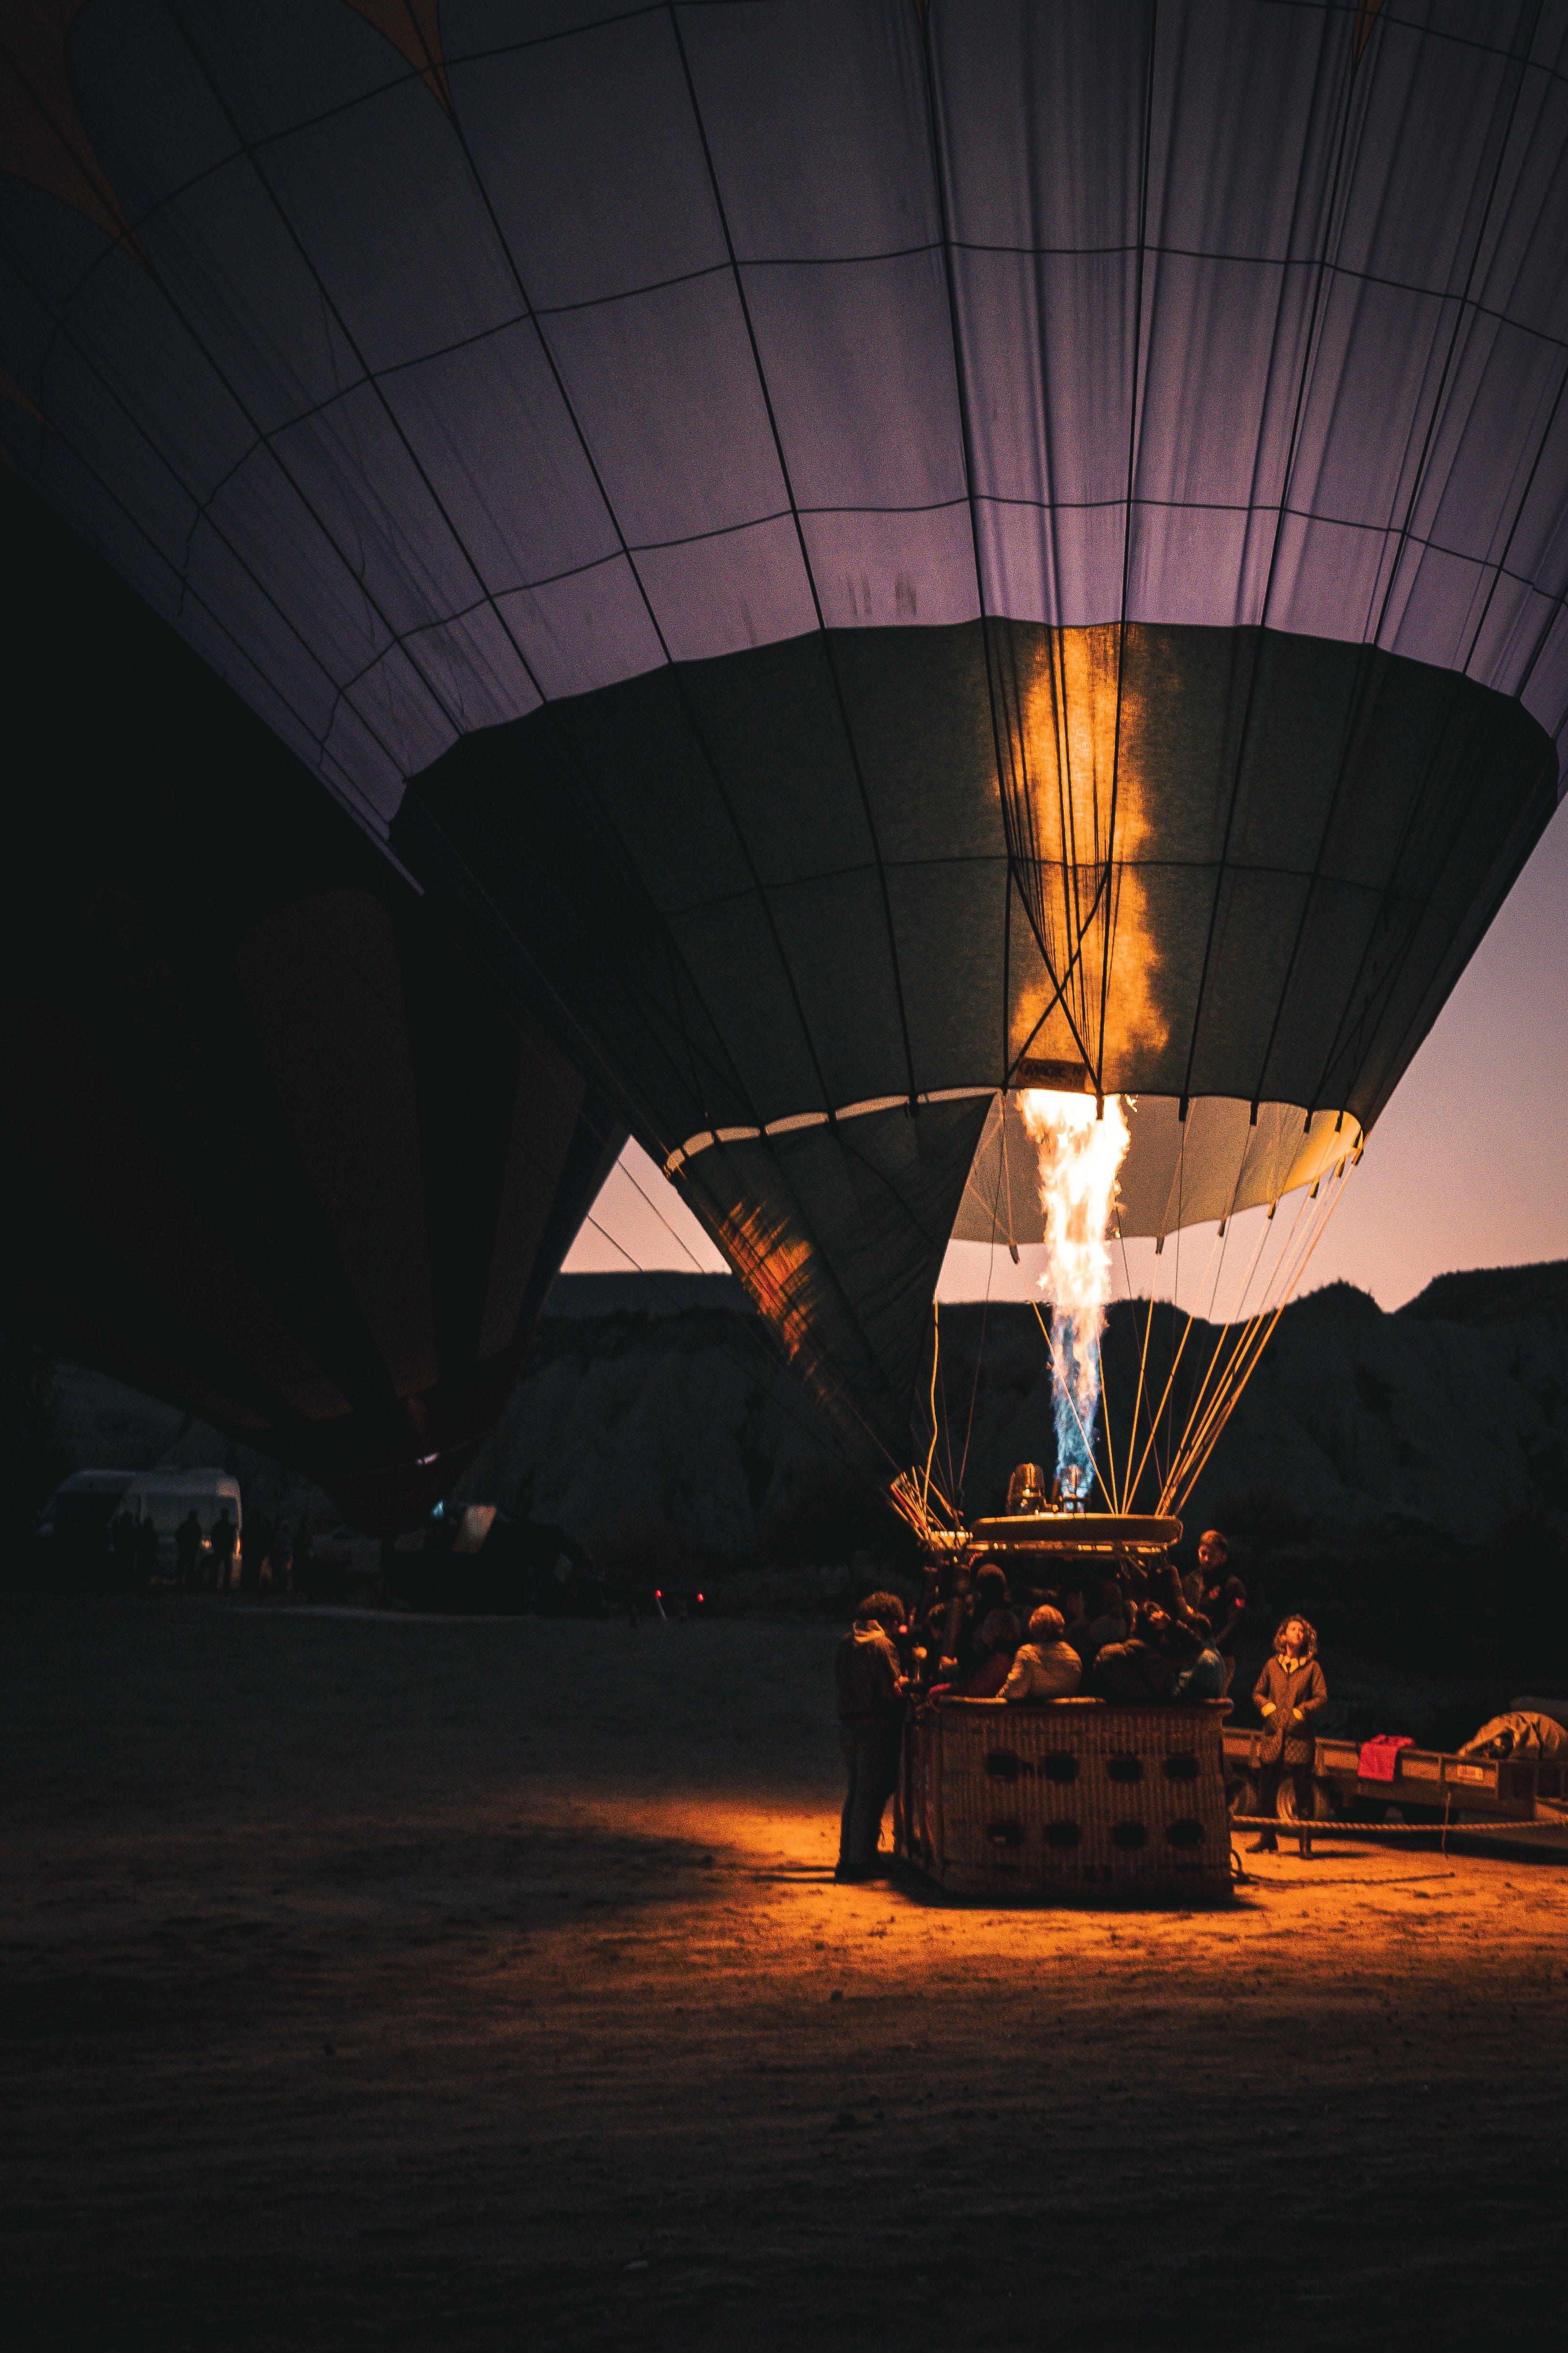 What happens to the air inside the balloon when heated? 